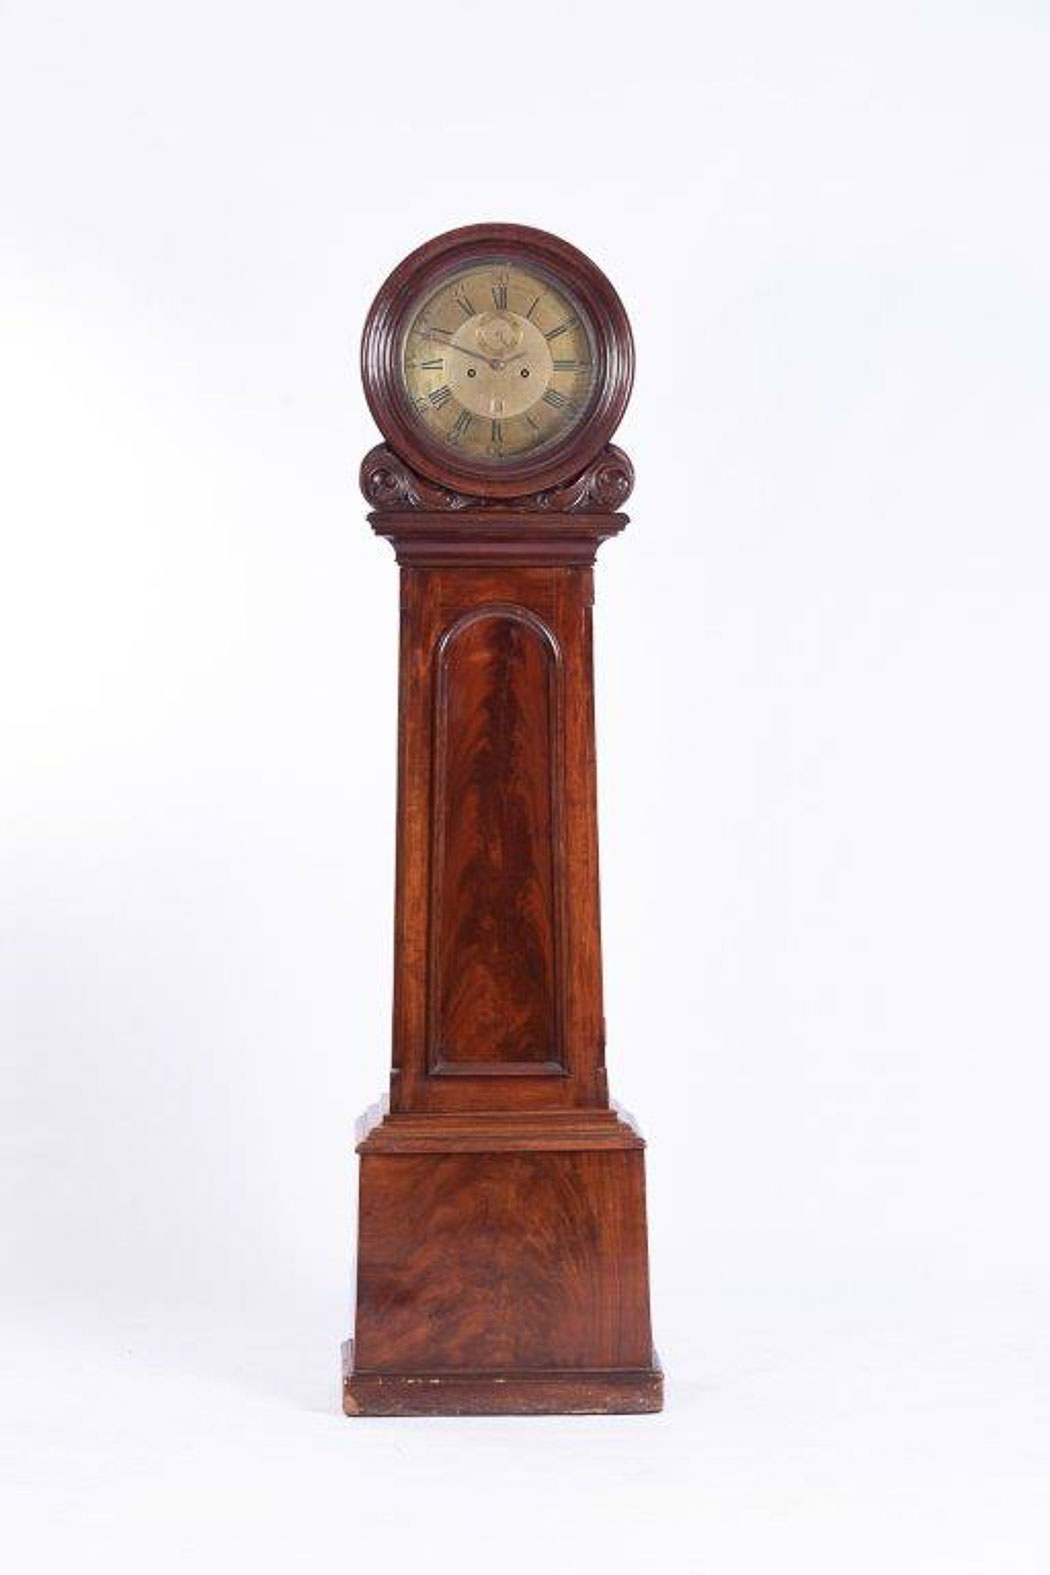 A MAHOGANY DRUMHEAD LONGCASE CLOCK BUYERS ARE ADVISED THAT A SERVICE IS RECOMMENDED FOR ALL CLOCKS